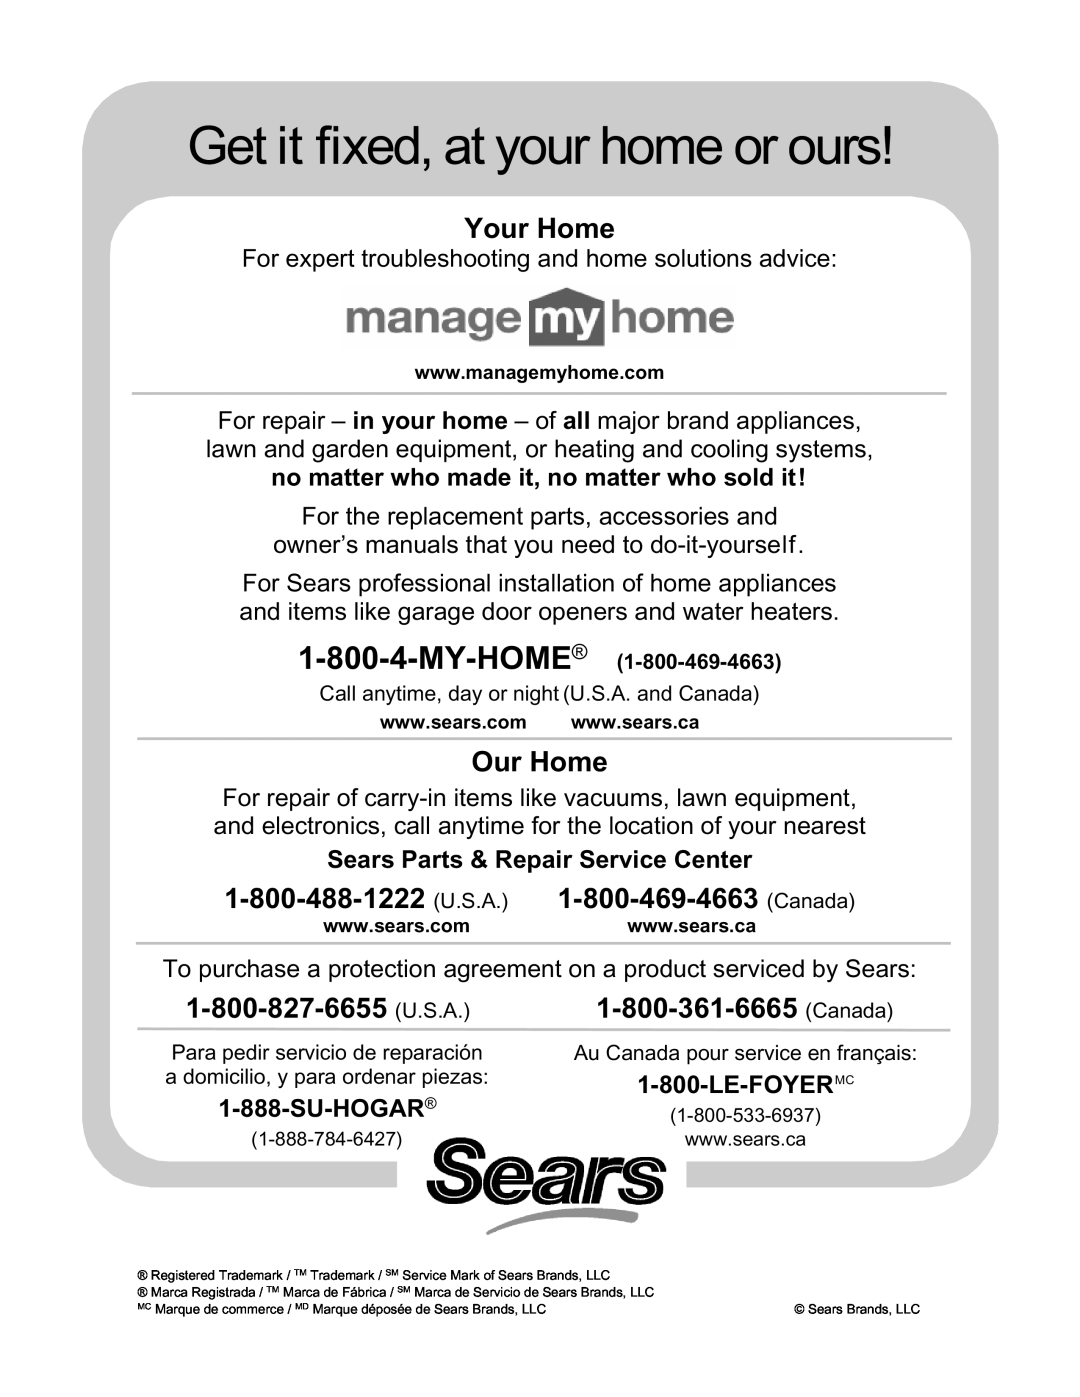 Kenmore 790.4659 Get it fixed, at your home or ours, Your Home, Our Home, Sears Parts & Repair Service Center, Su-Hogar 